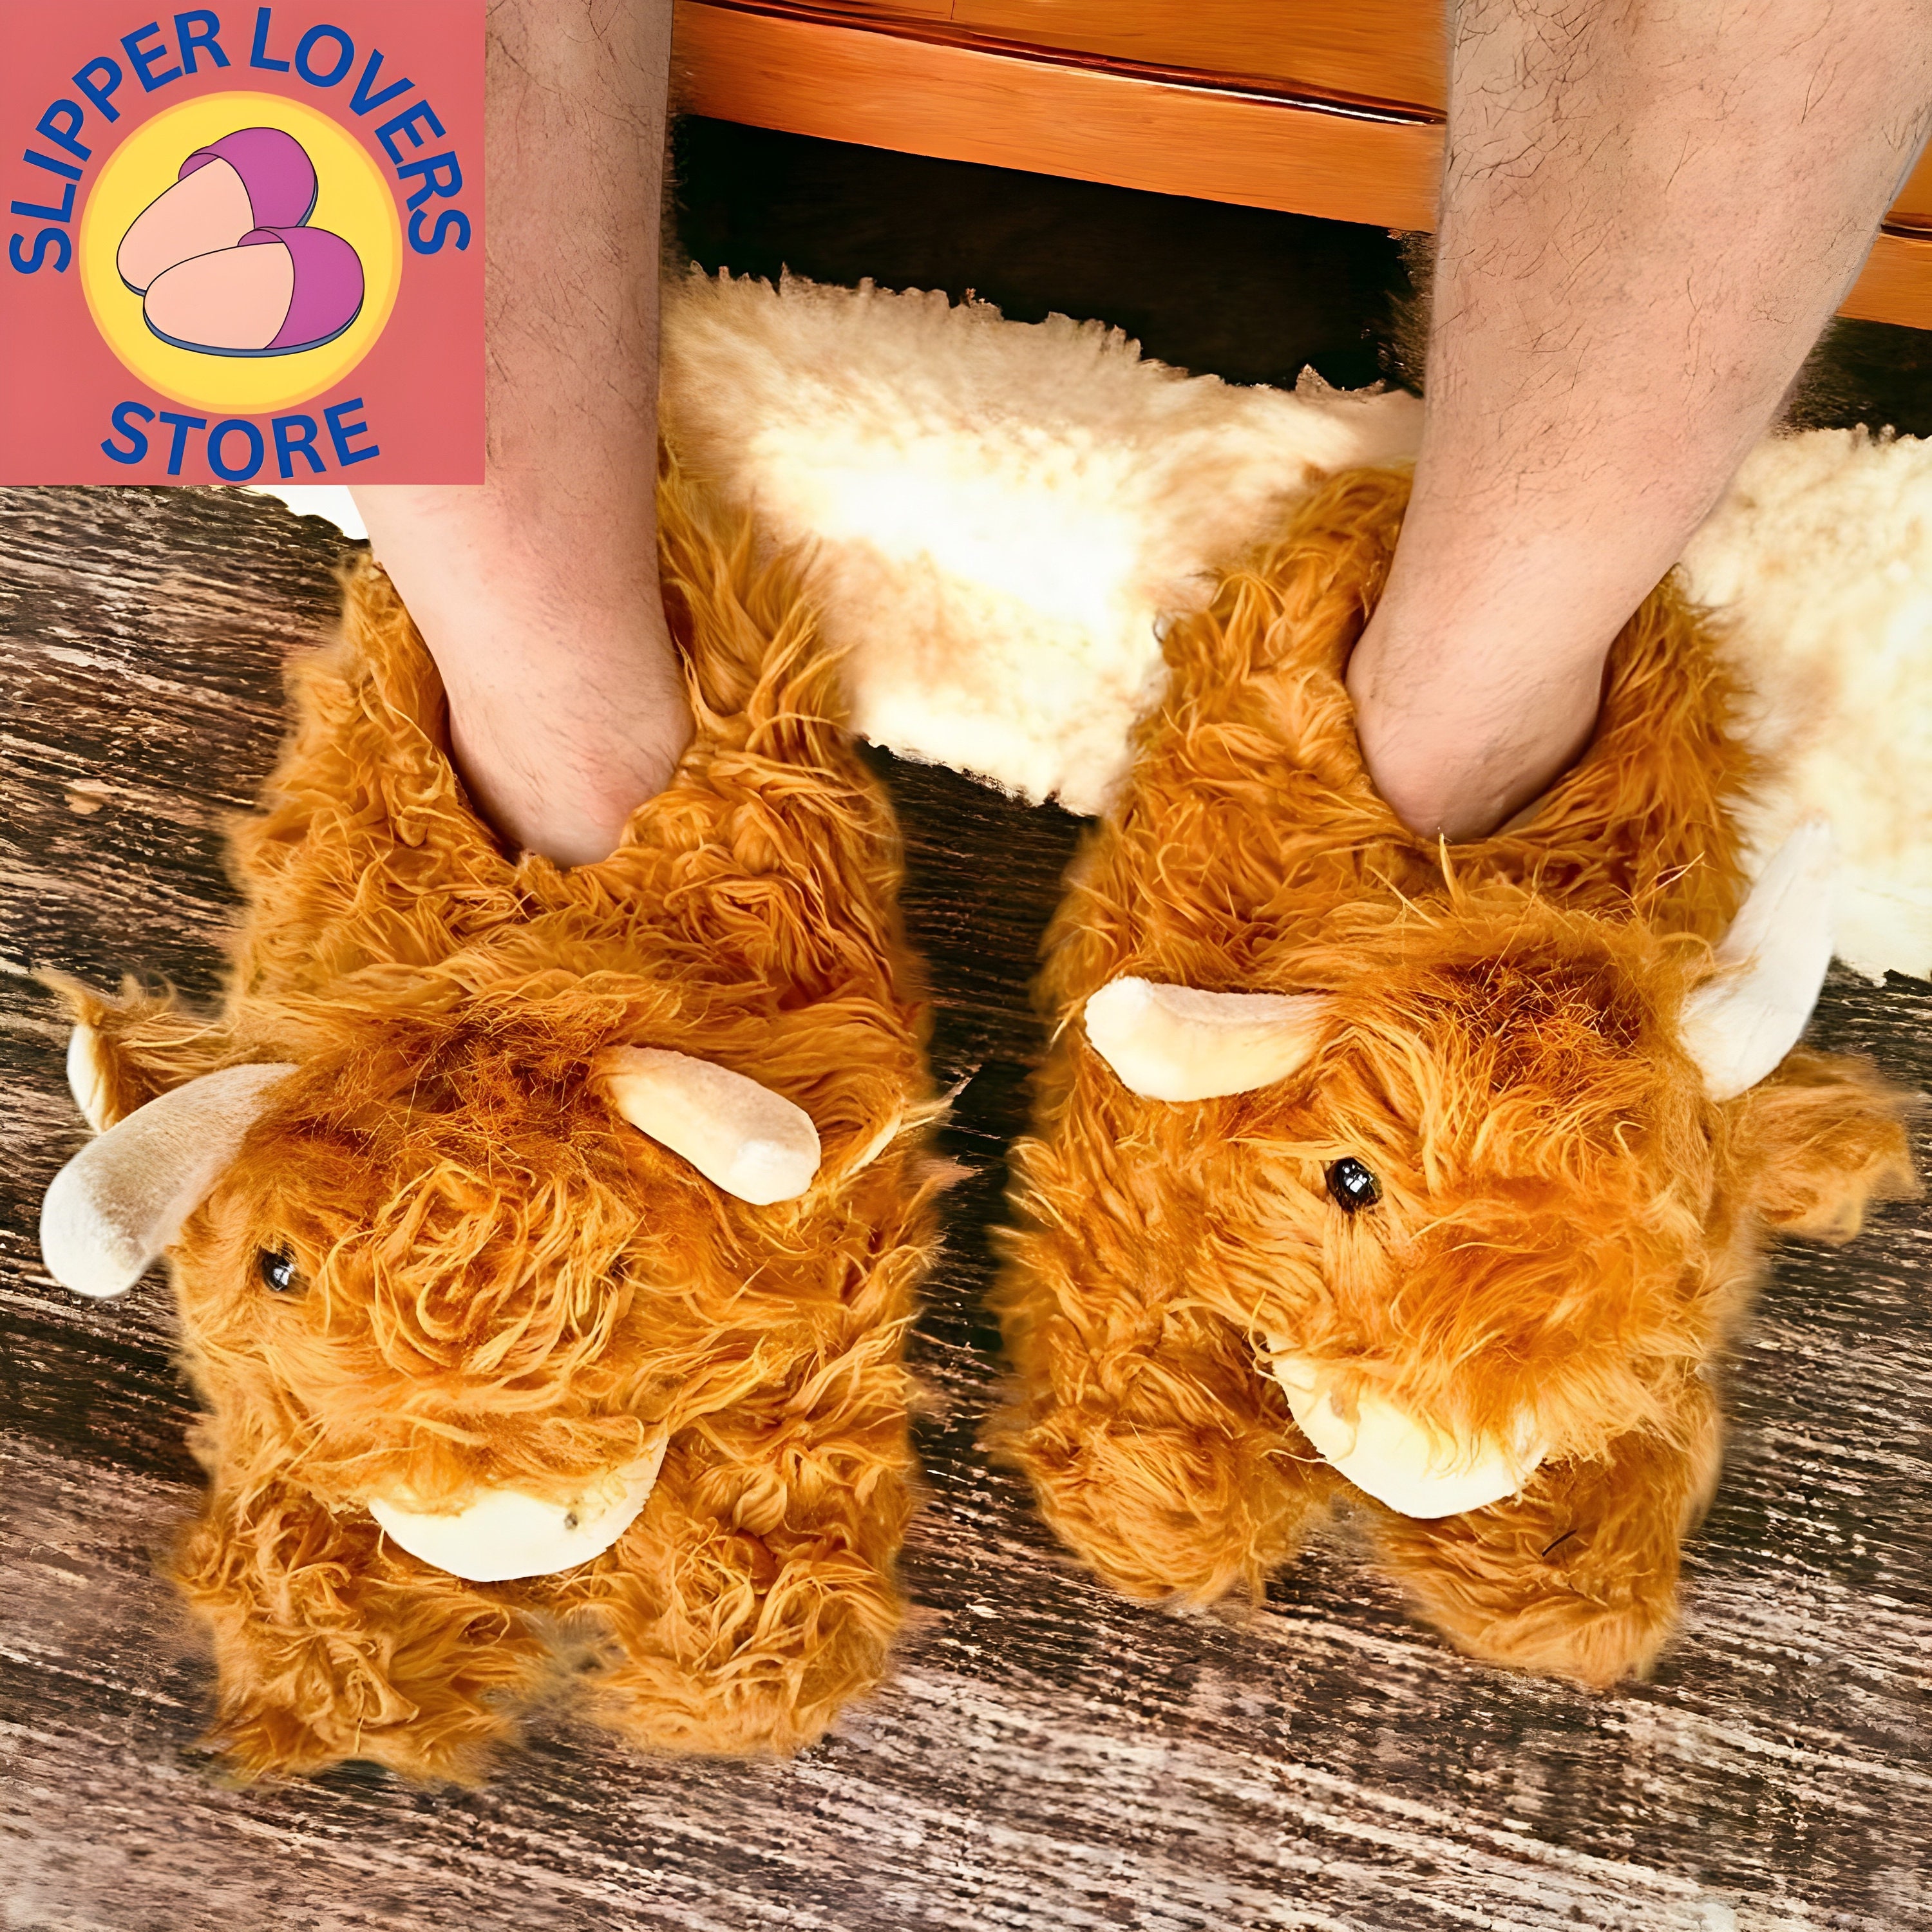 Highland Cow Slippers Plush, Cozy Furry Slippers, Cute Slippers for Women,  Cute Present Gift, Moo Animal Slippers - Etsy